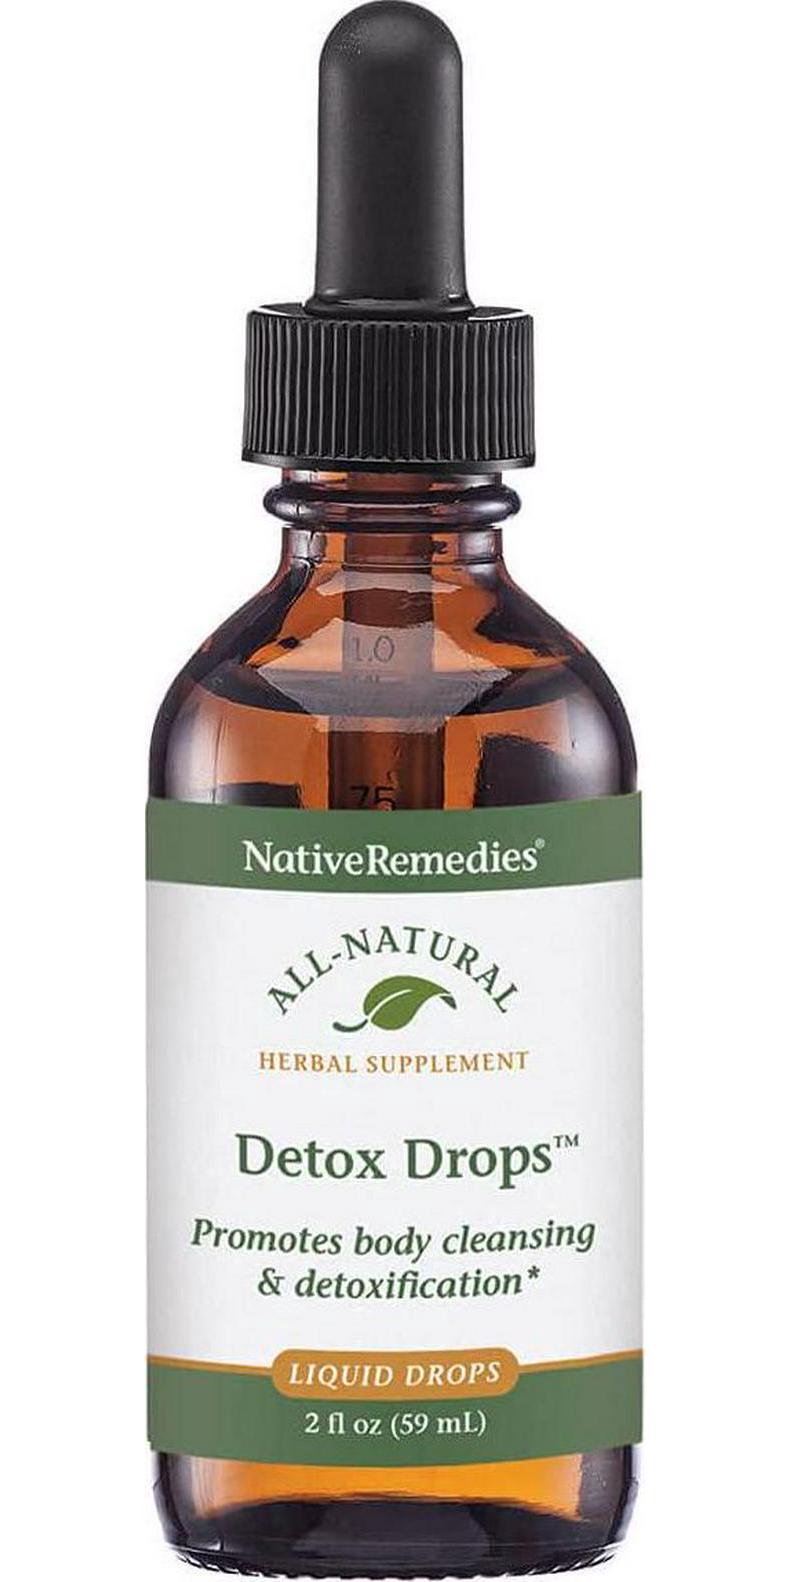 Native Remedies Detox ComboPack - All Natural Herbal Supplements for Systemic Cleansing, Healthy Liver and Gallbladder Functioning, 2-2 Fl oz.